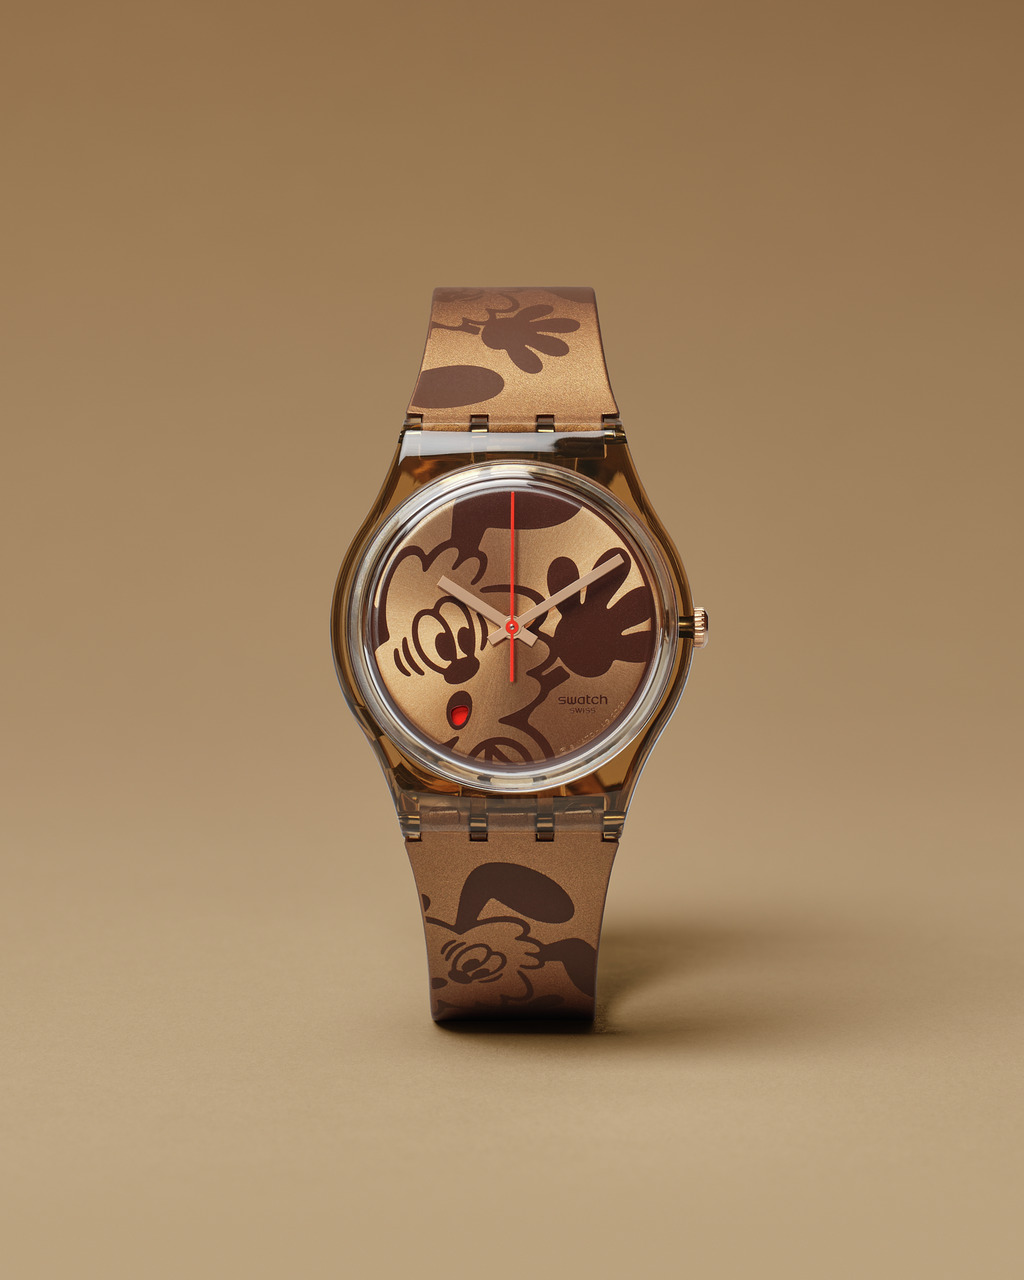 , Swatch and Japanese graphic artist Verdy join forces for art installation and limited-edition watch at Biennale Arte 2024